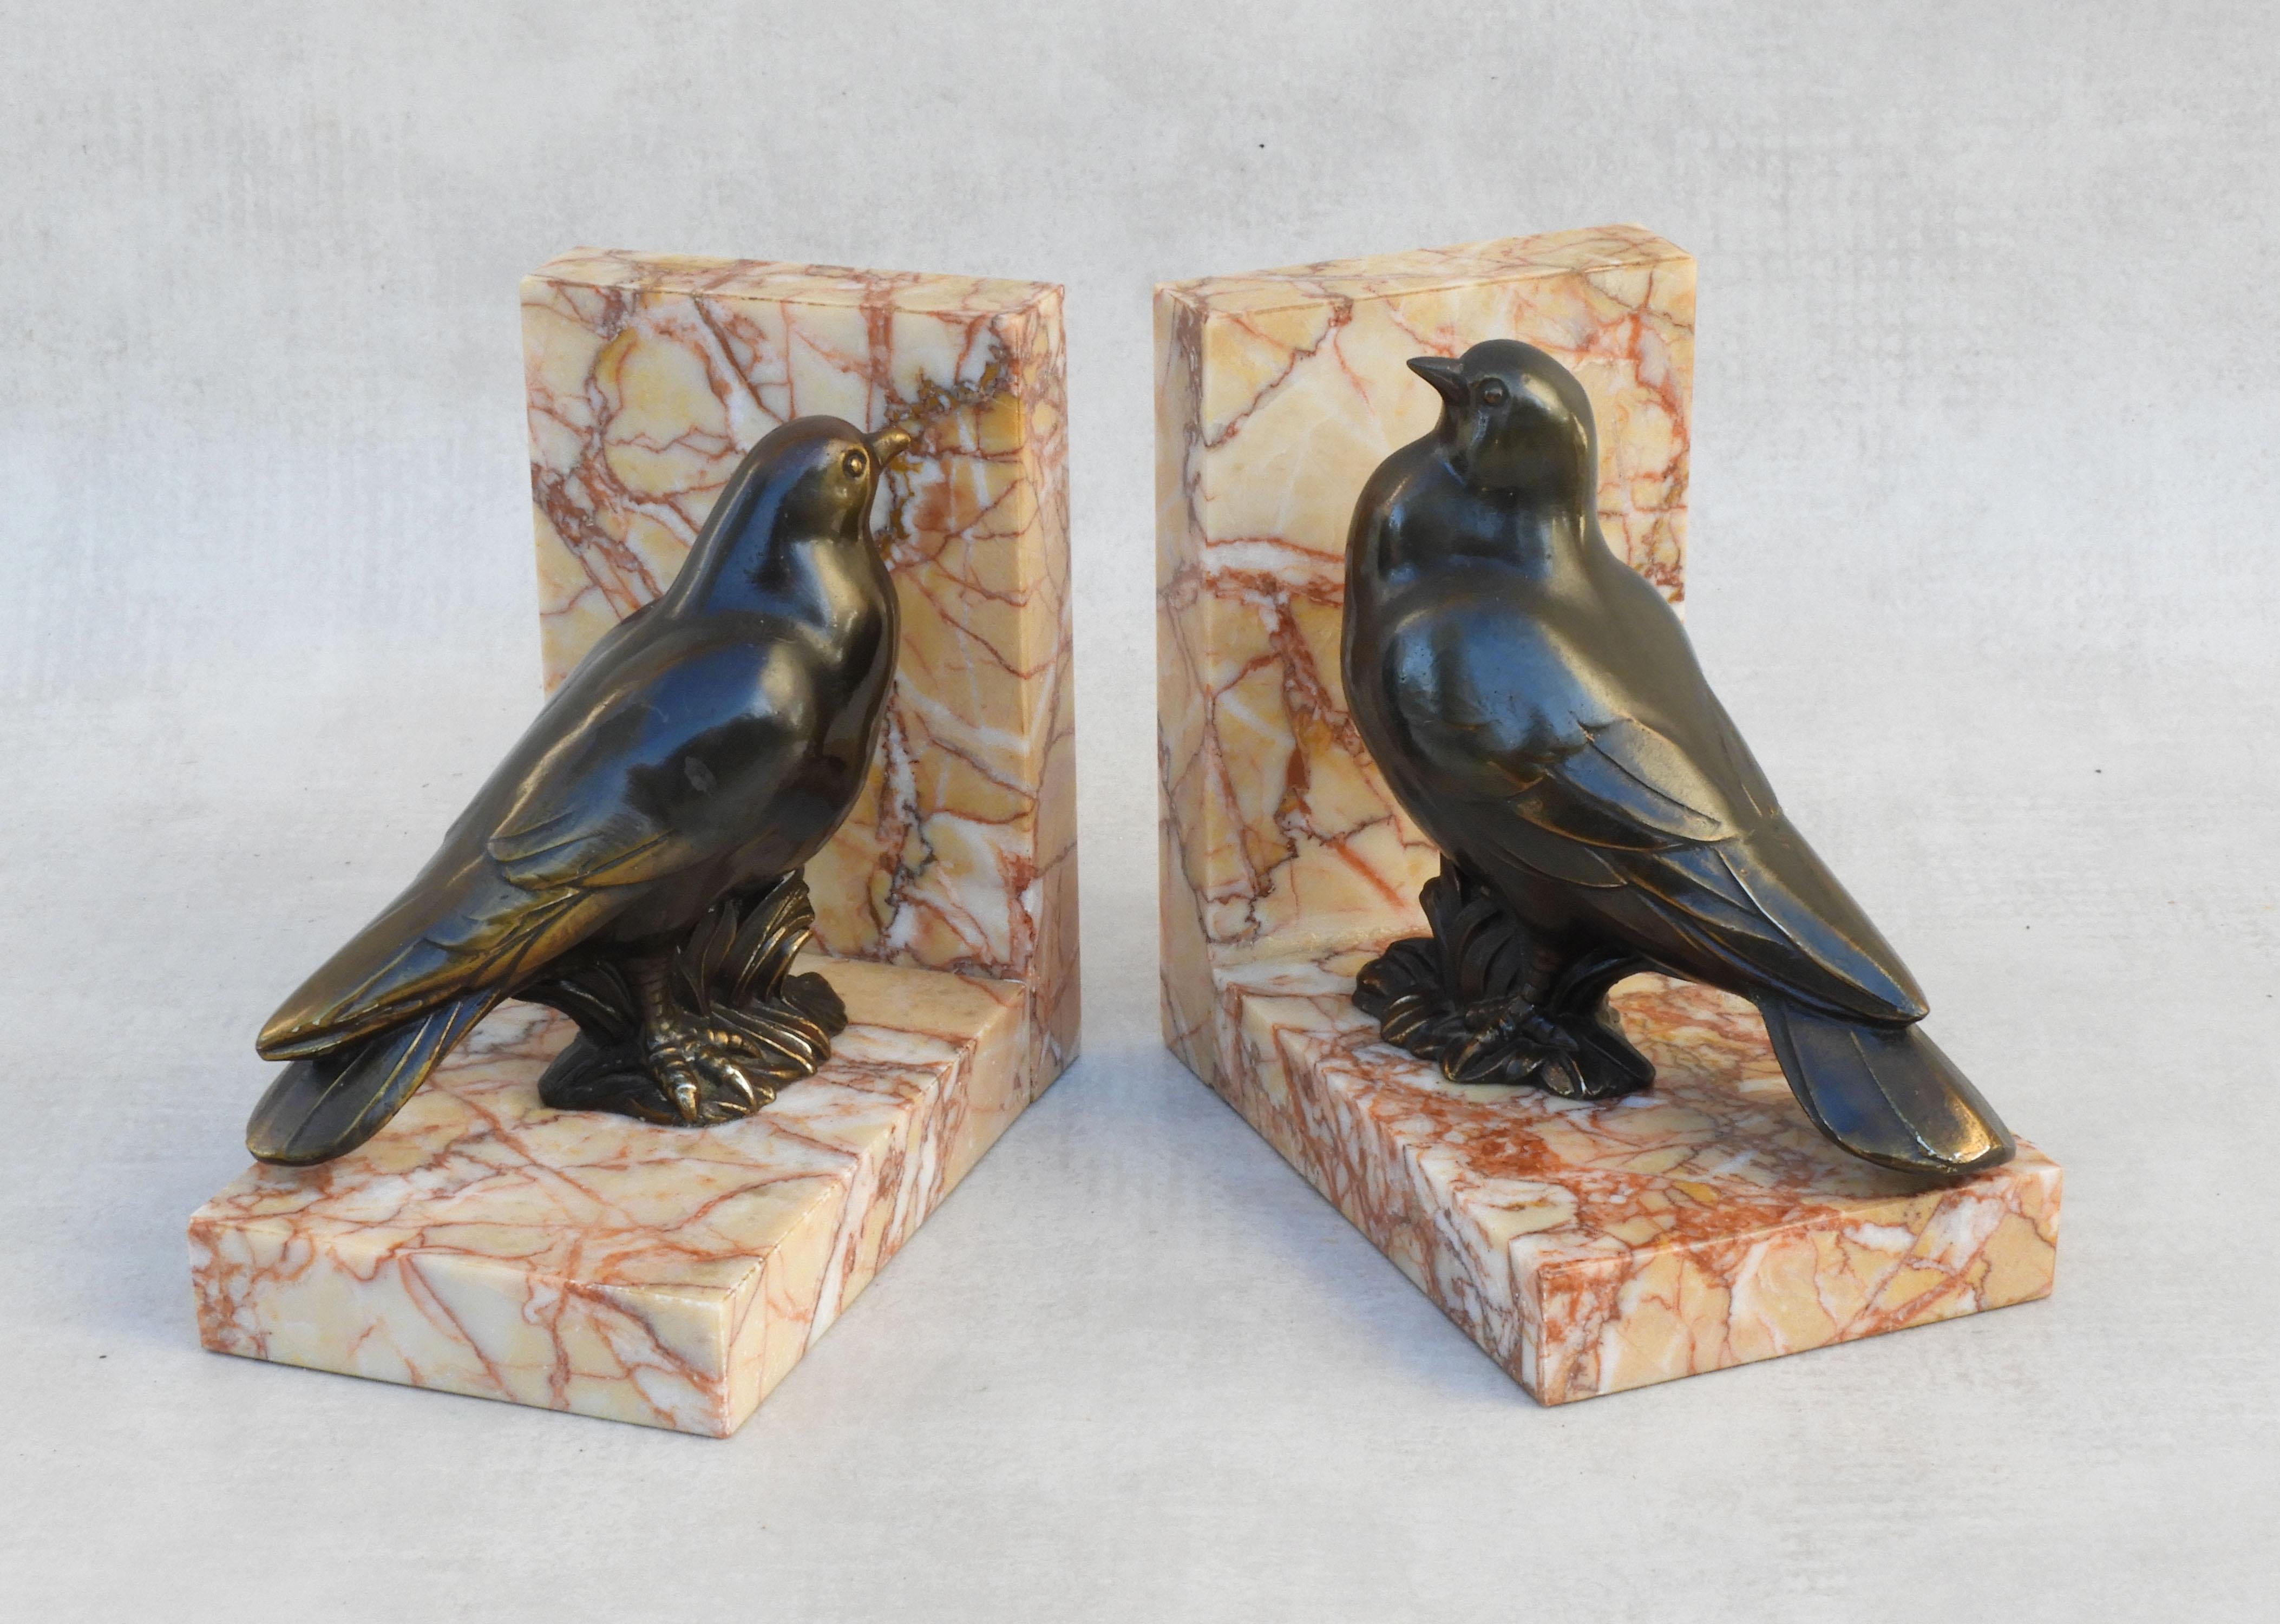 A delightful pair of French Art Deco bird book ends C1930s.  A charming male and female couple in bronze patinated spelter perched on marble L-shaped plinths. In good vintage condition with nice patina. 

Dimensions: height: 4.72 in. (12 cm) width: